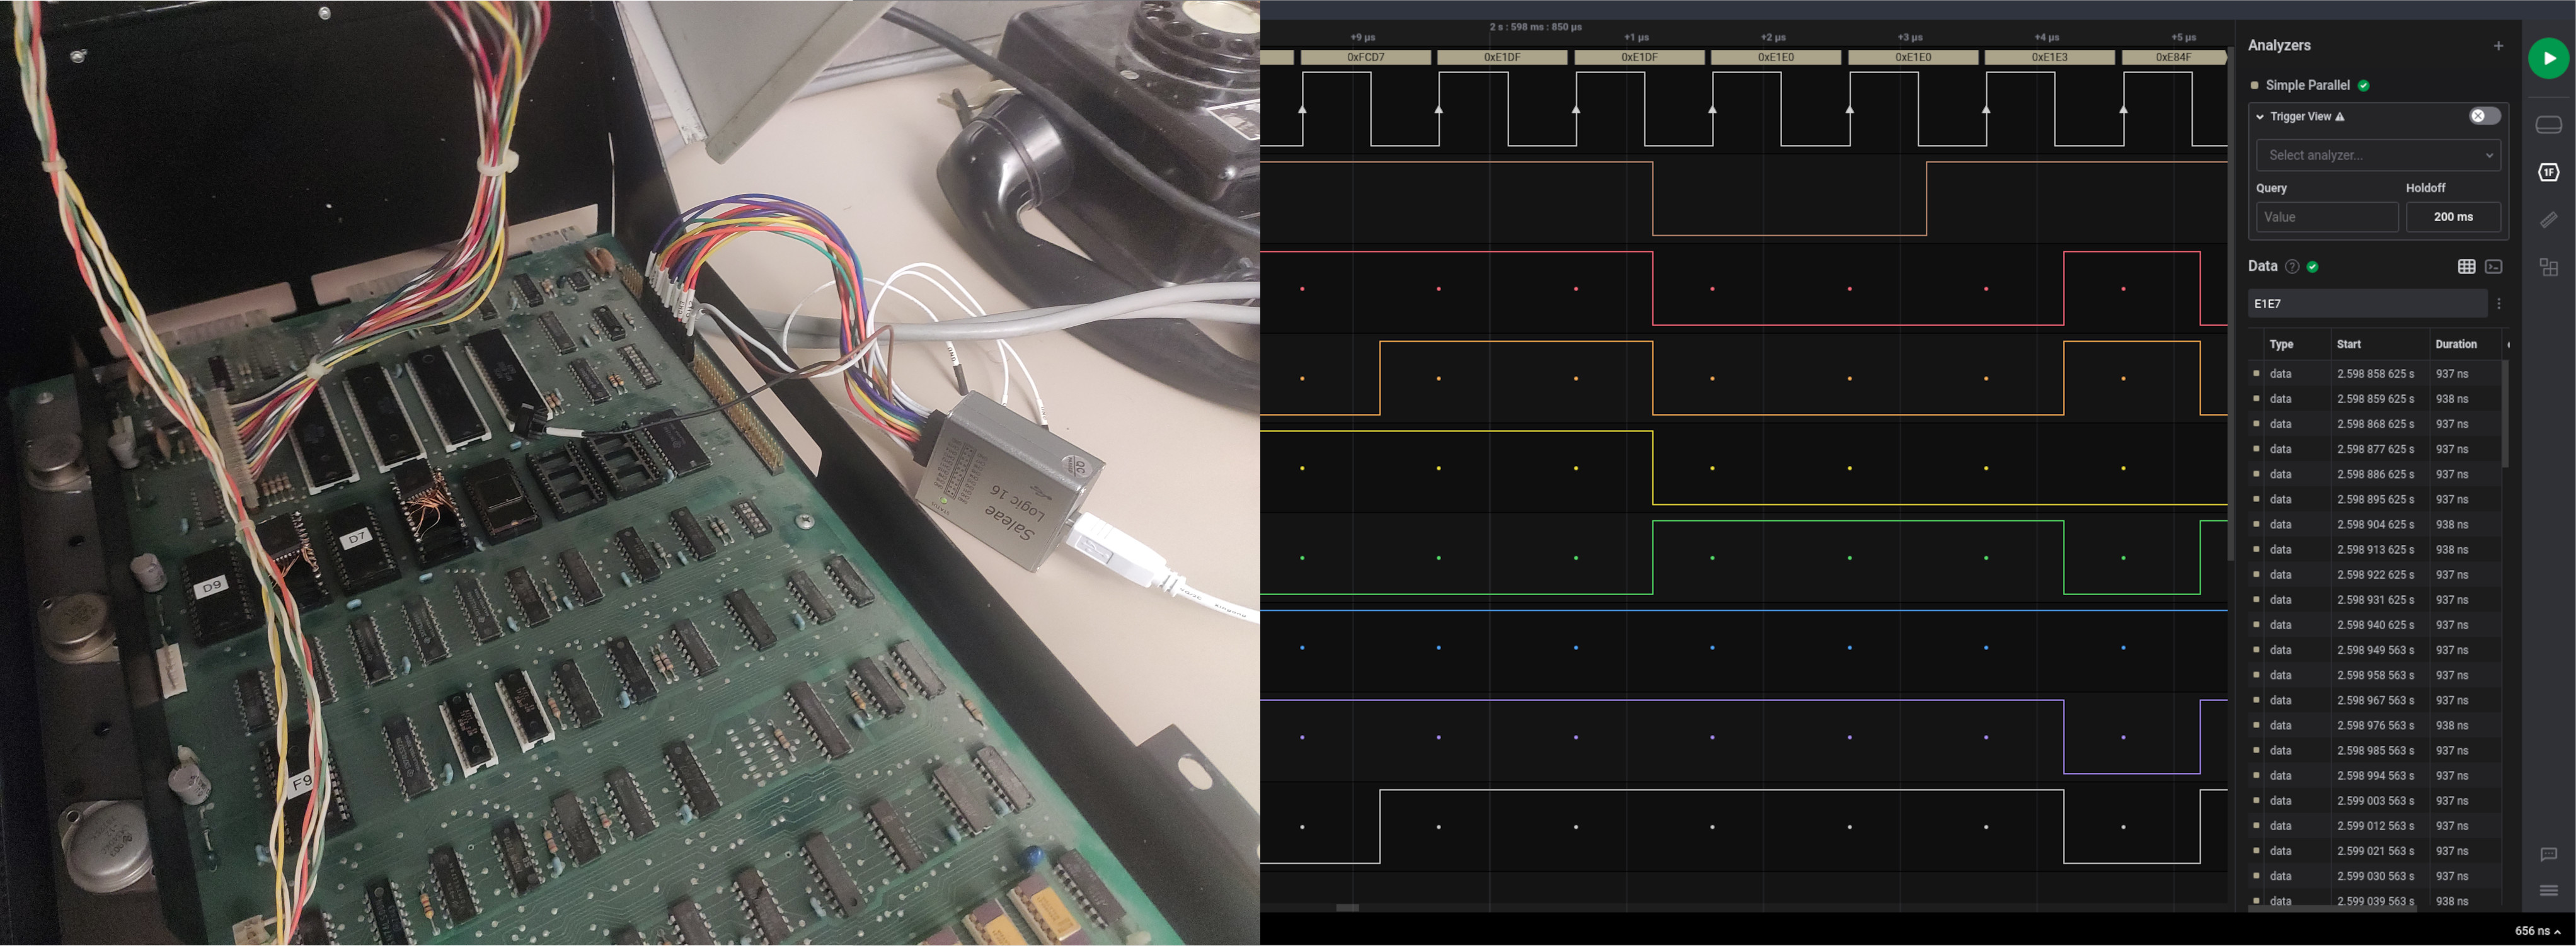 Left: A logic analyzer attached to the address bus pins and the Φ₂ system clock. Right: Screenshot of the logic analyzer software, showing the decoded m\
emory addresses at the top.